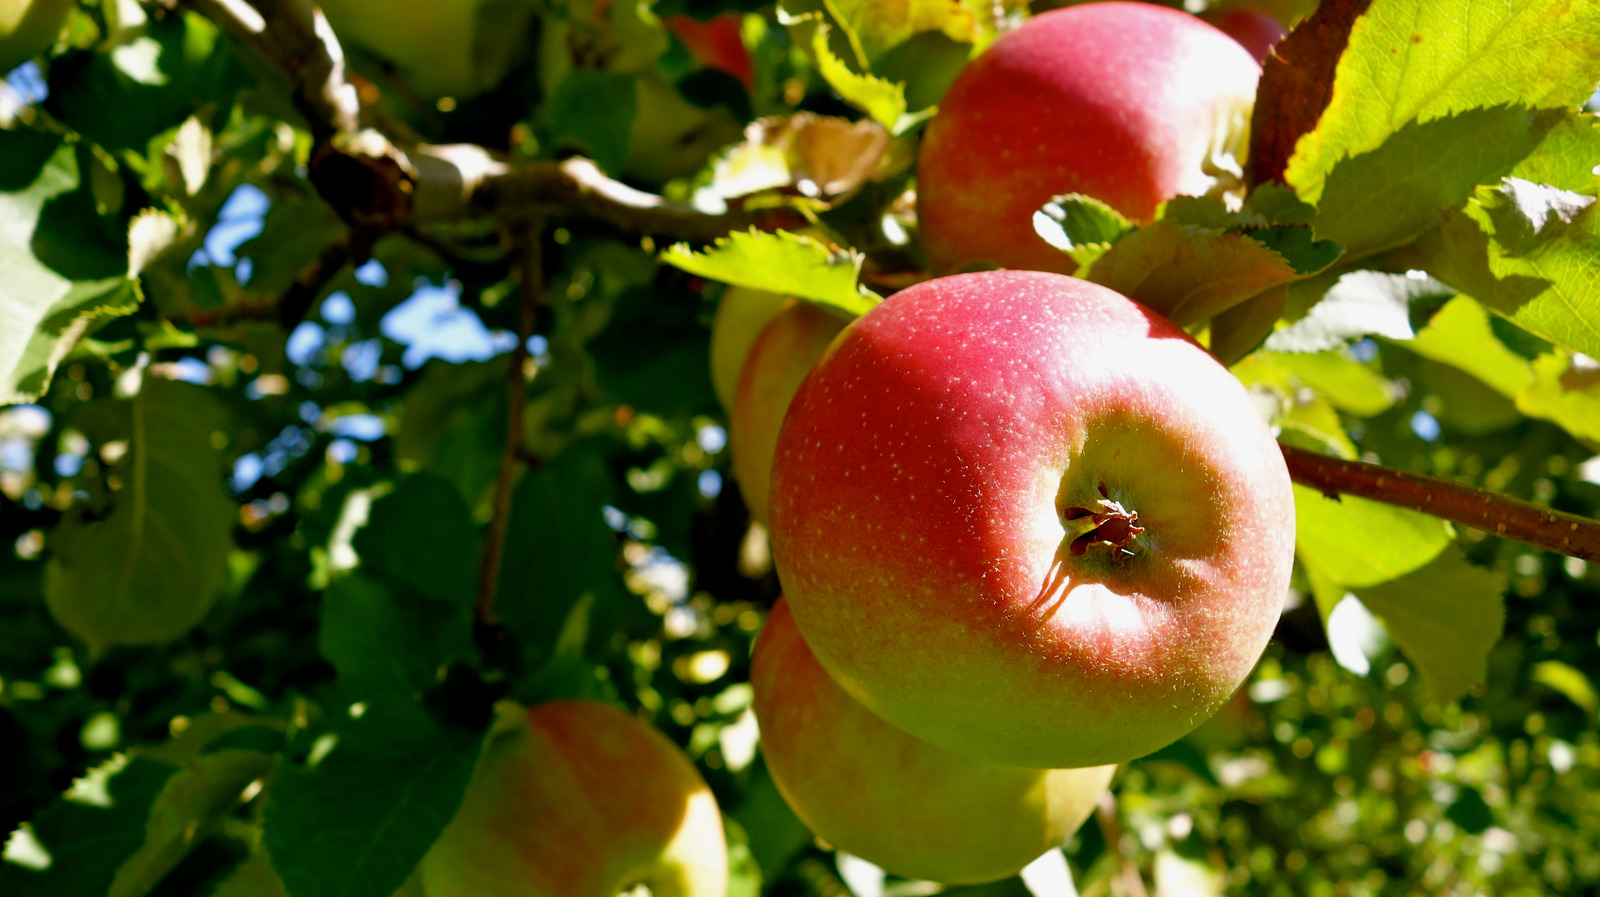 How To Grow And Care For An Apple Tree